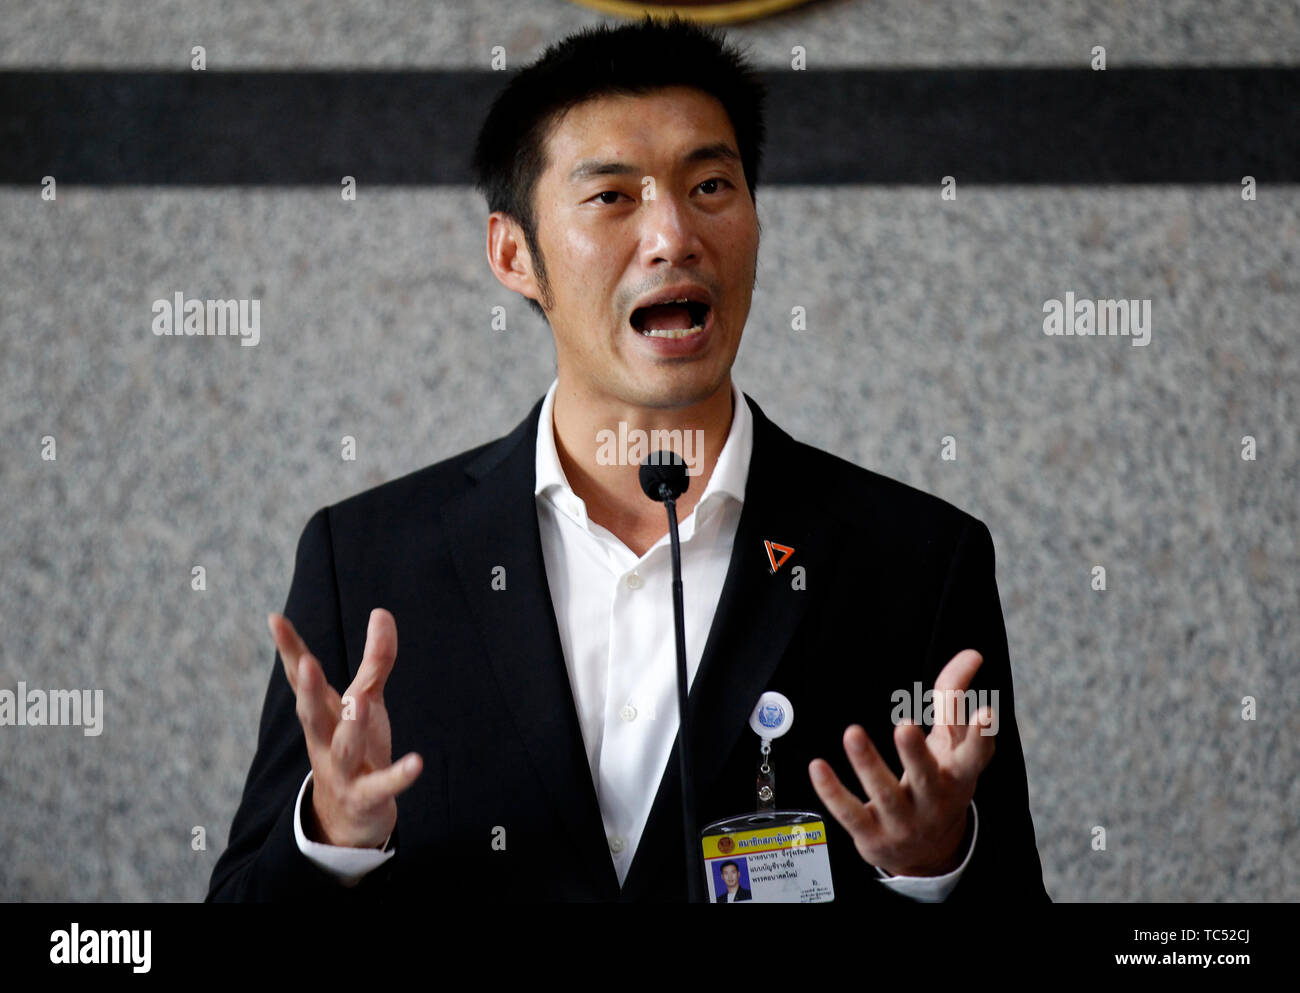 Thanathorn Juangroongruangkit, the Future Forward Party leader speaks while making a gesture at the news conference during the parliamentary vote for Thailand’s new prime minister, at the TOT Plc’ auditorium in Bangkok. Stock Photo